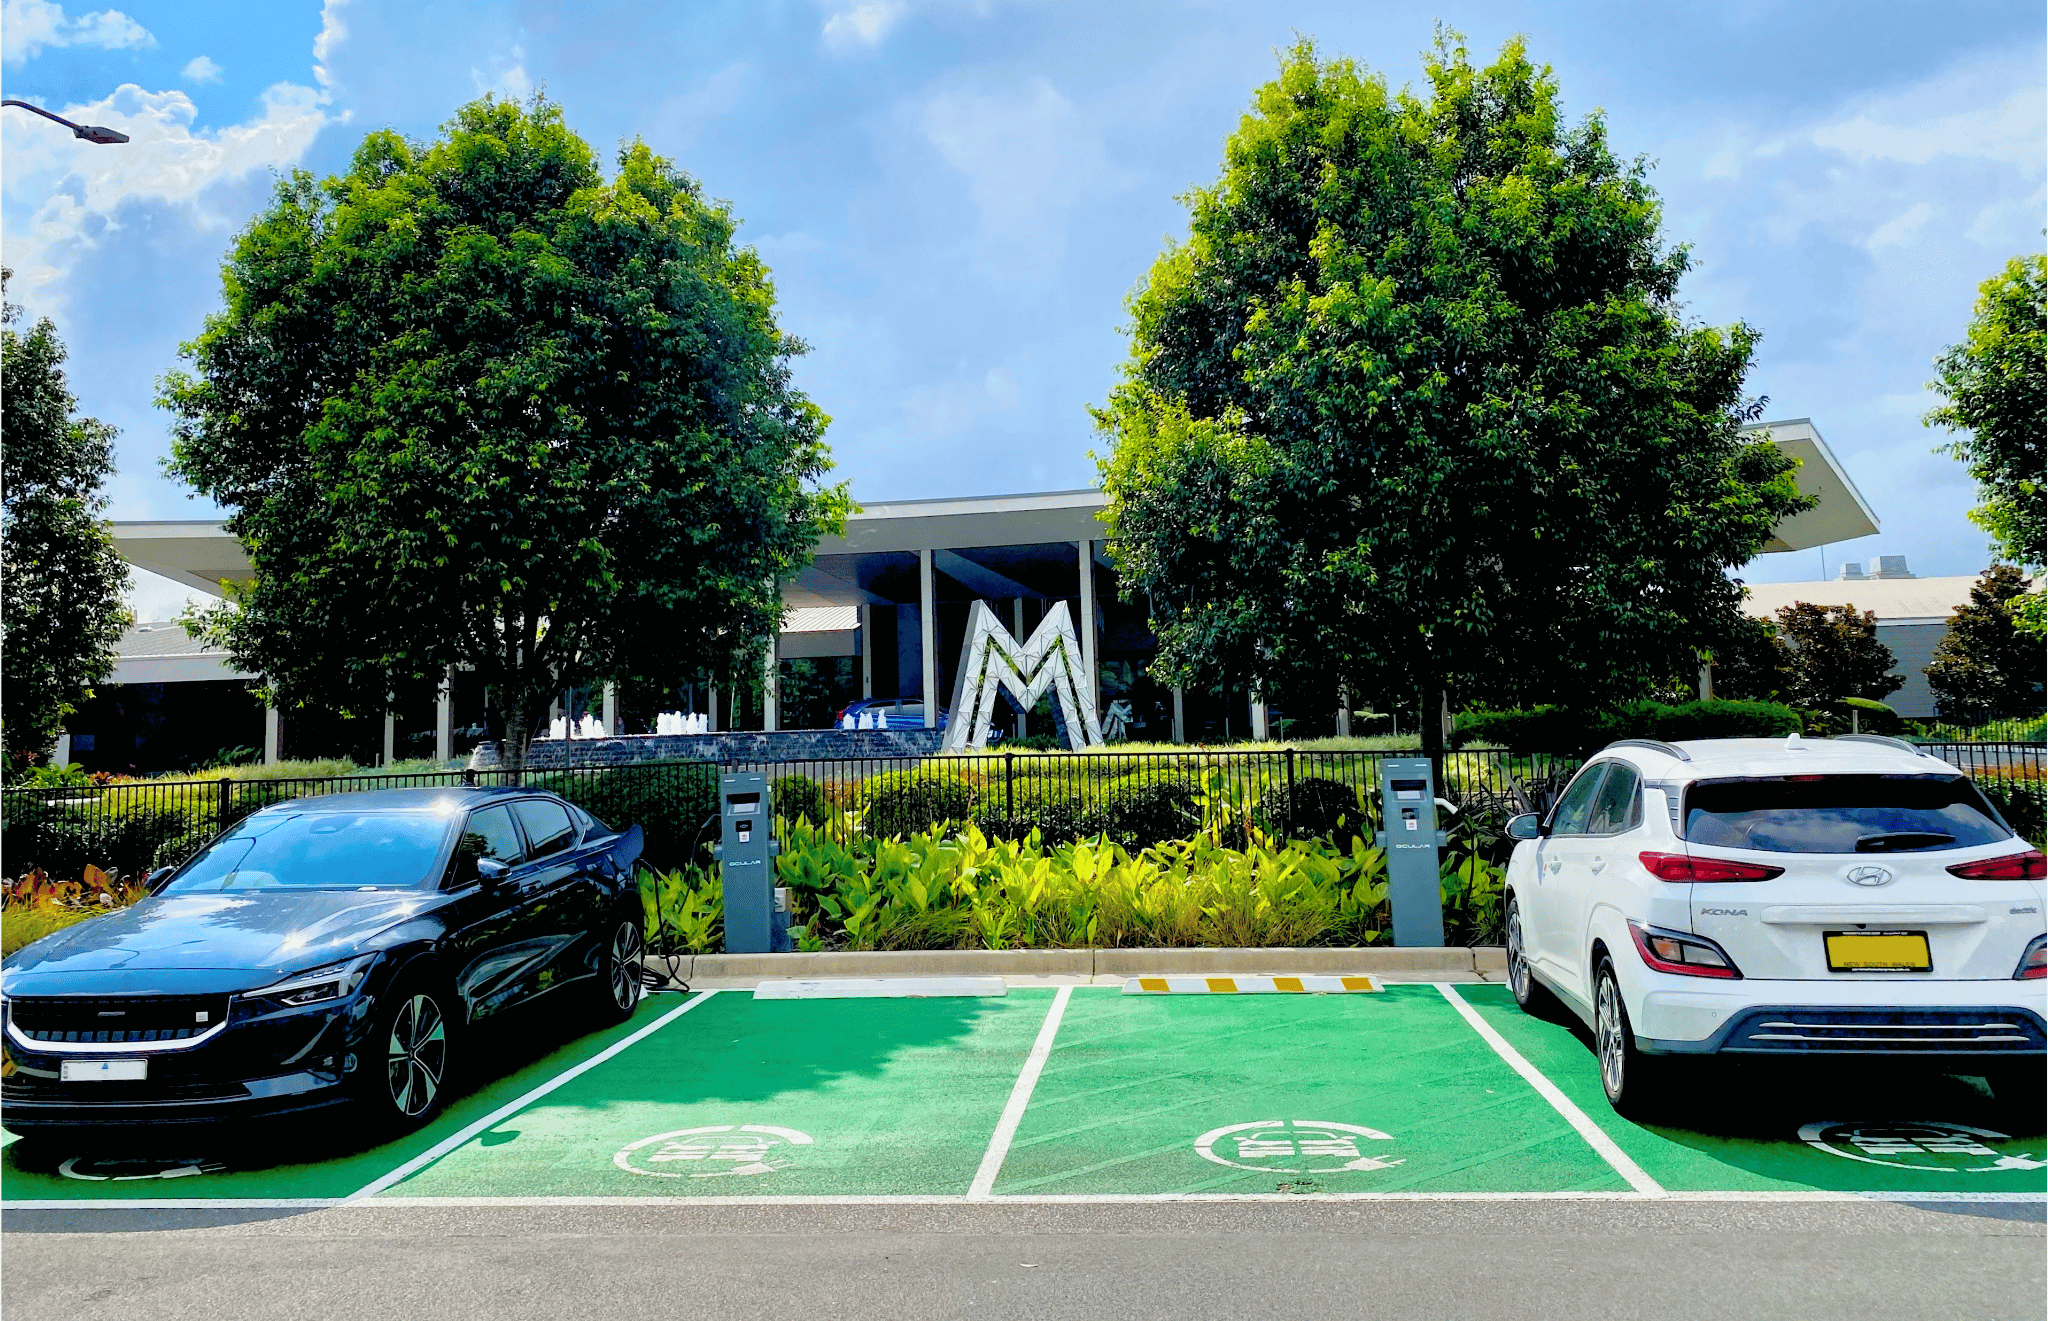 Electric vehicles parked in front of the Mingara Recreation Club